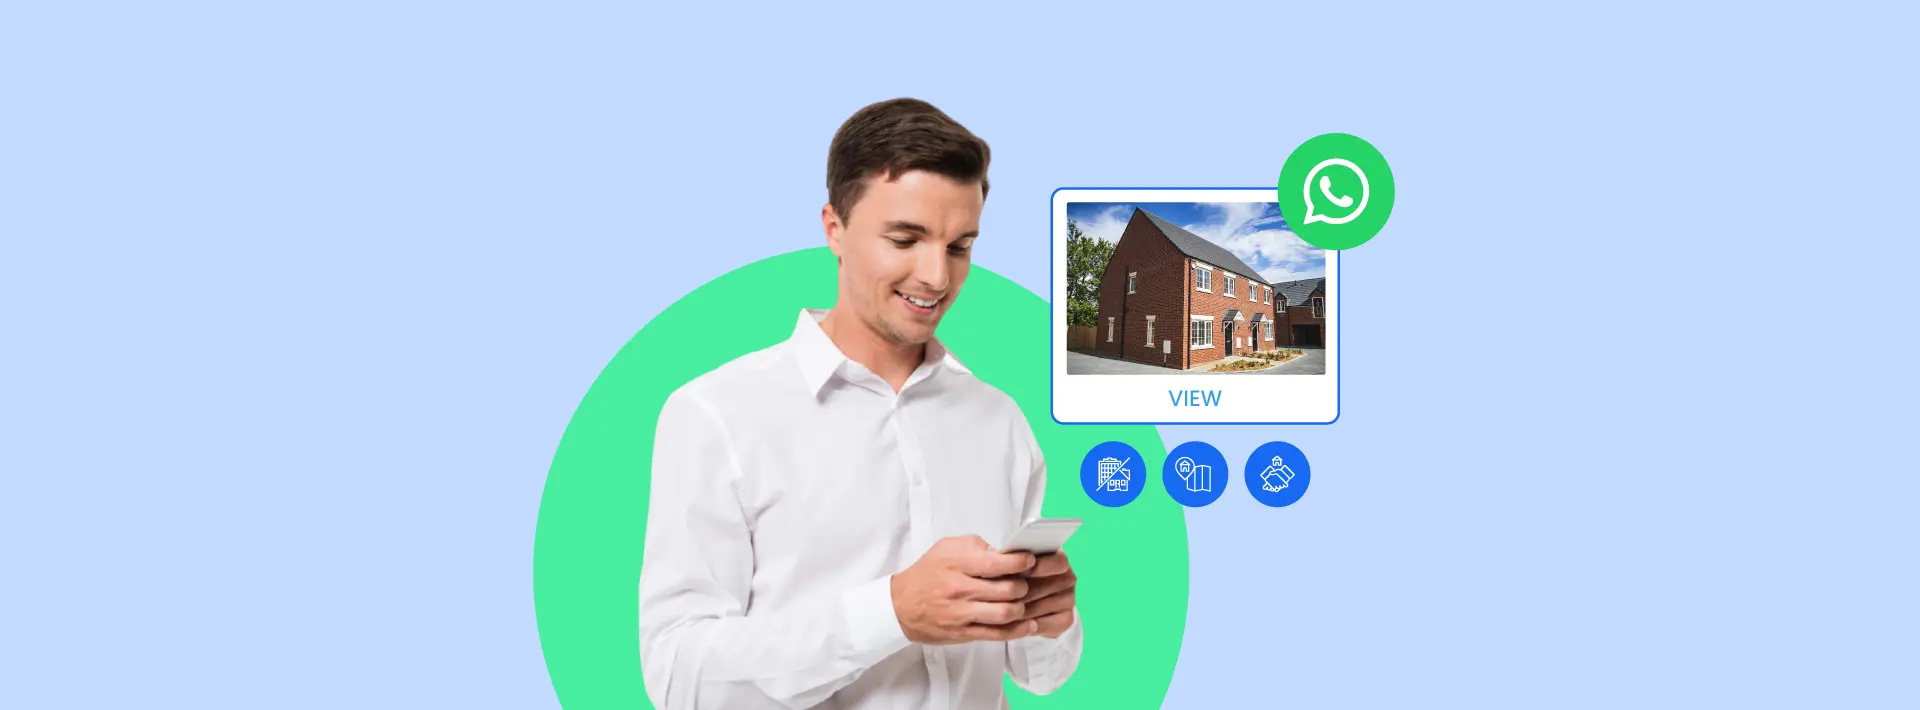 Using WhatsApp solutions to boost sales and marketing results for Estate Agencies.